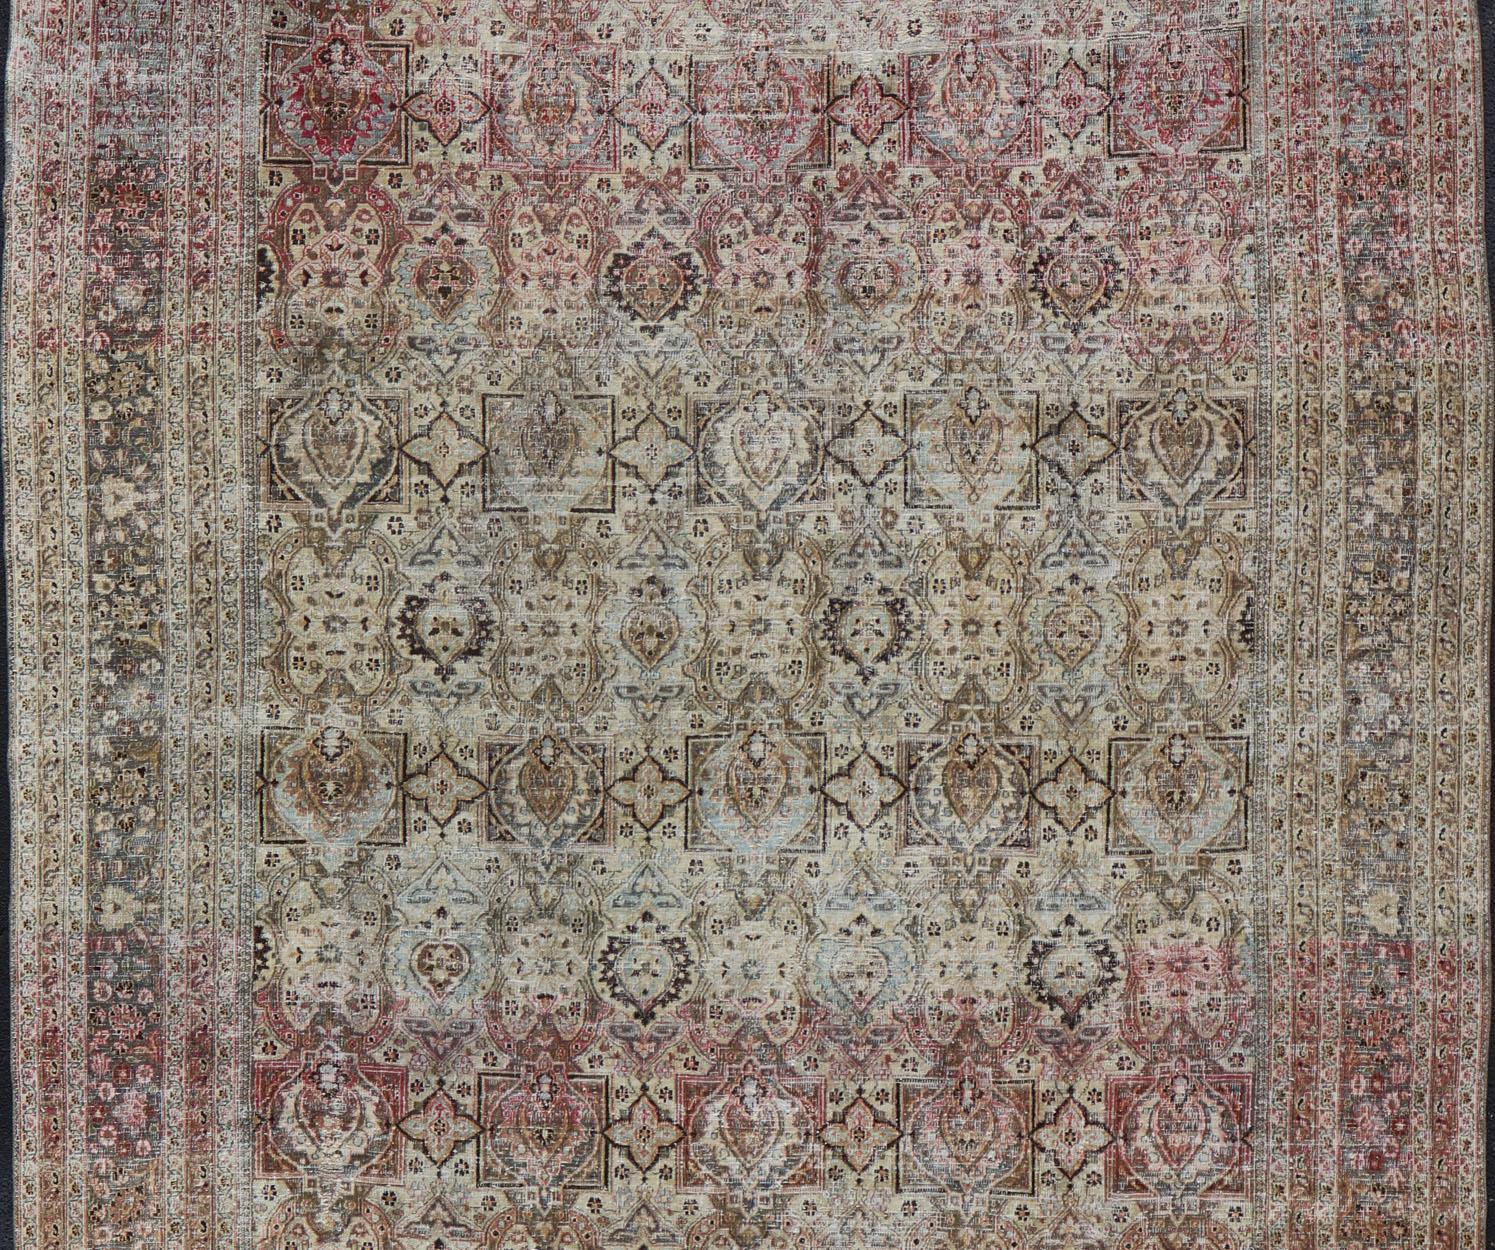  Antique Persian Khorassan Rug with Palmettes, Geometric Flowers in Soft Tones In Distressed Condition For Sale In Atlanta, GA